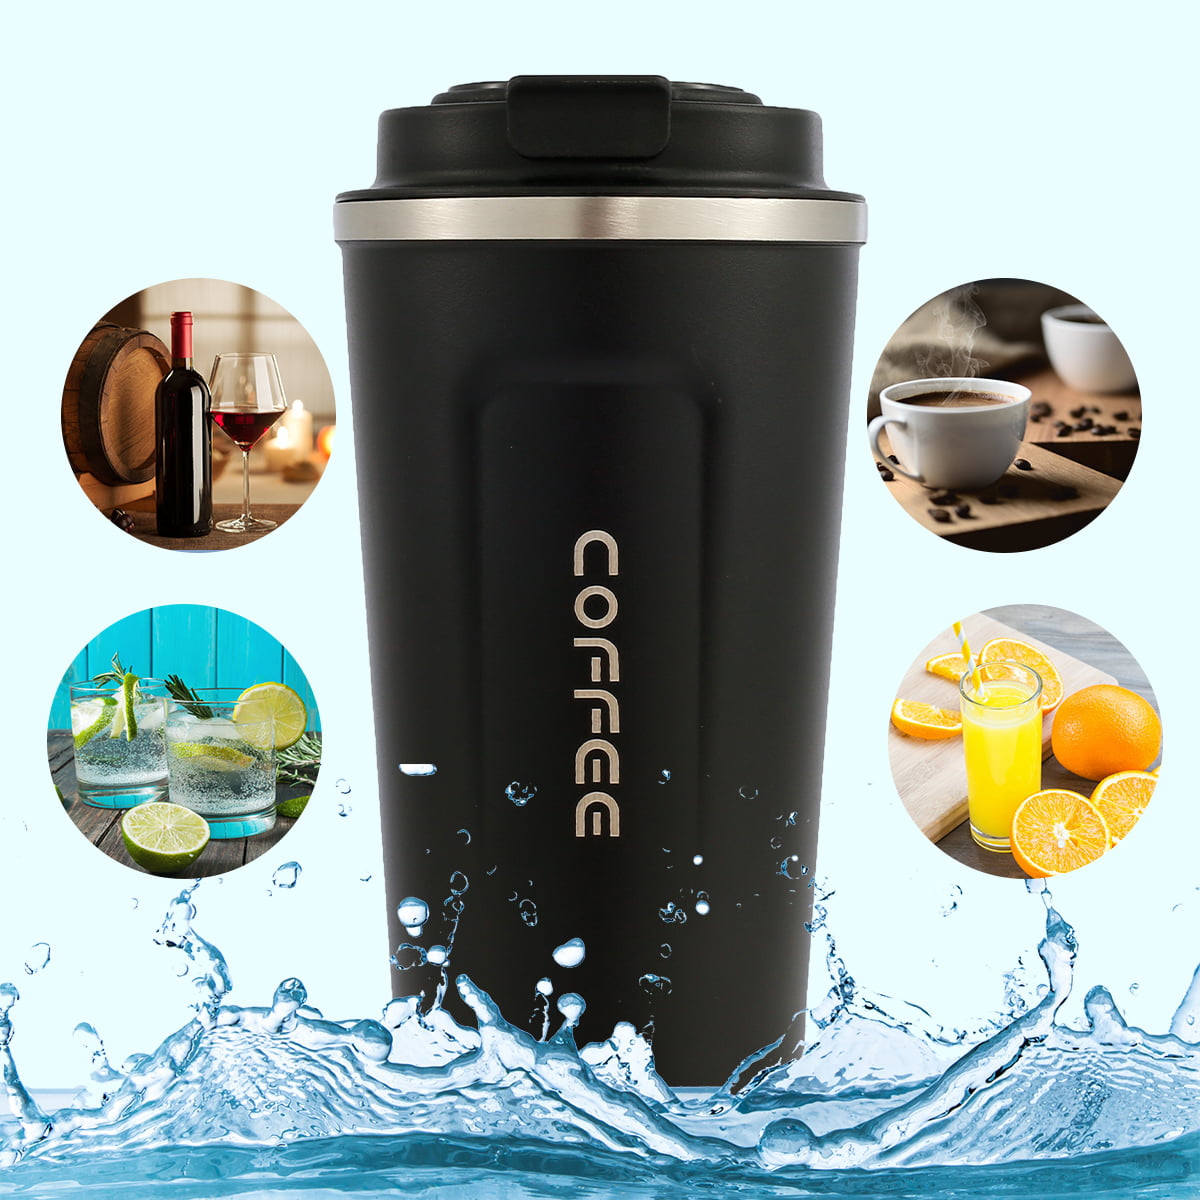 YINJOYI Travel Mug Reusable Coffee Cups 510ml/18oz Thermal Insulated Vacuum Insulation Stainless Steel Bottle for Hot Cold Drinks Black